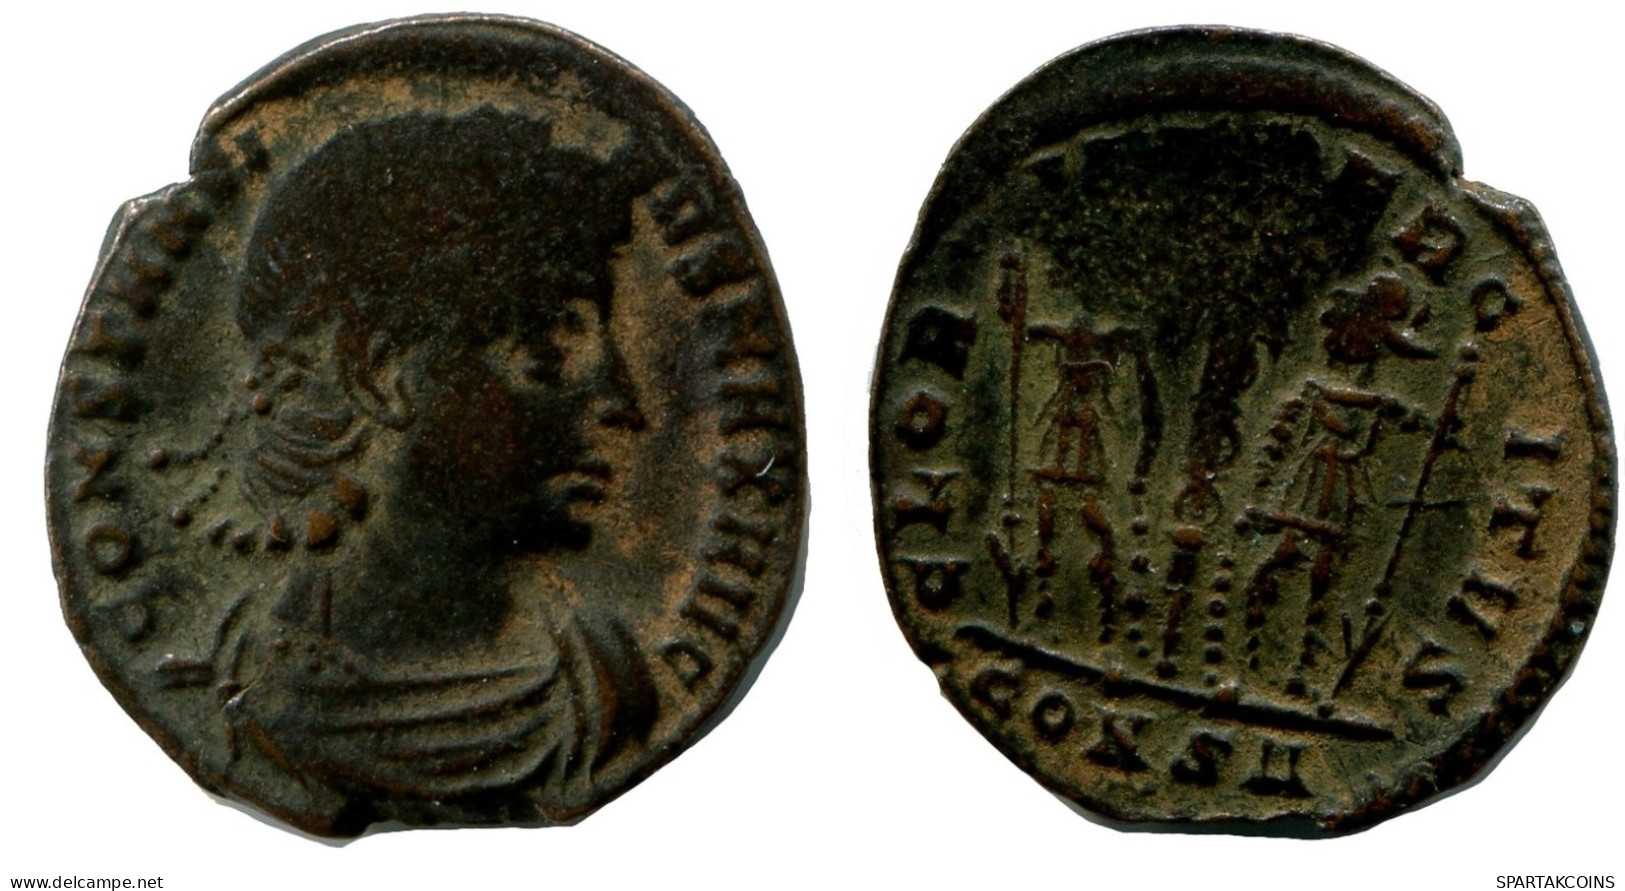 CONSTANTINE I CONSTANTINOPLE FROM THE ROYAL ONTARIO MUSEUM #ANC10805.14.U.A - El Imperio Christiano (307 / 363)